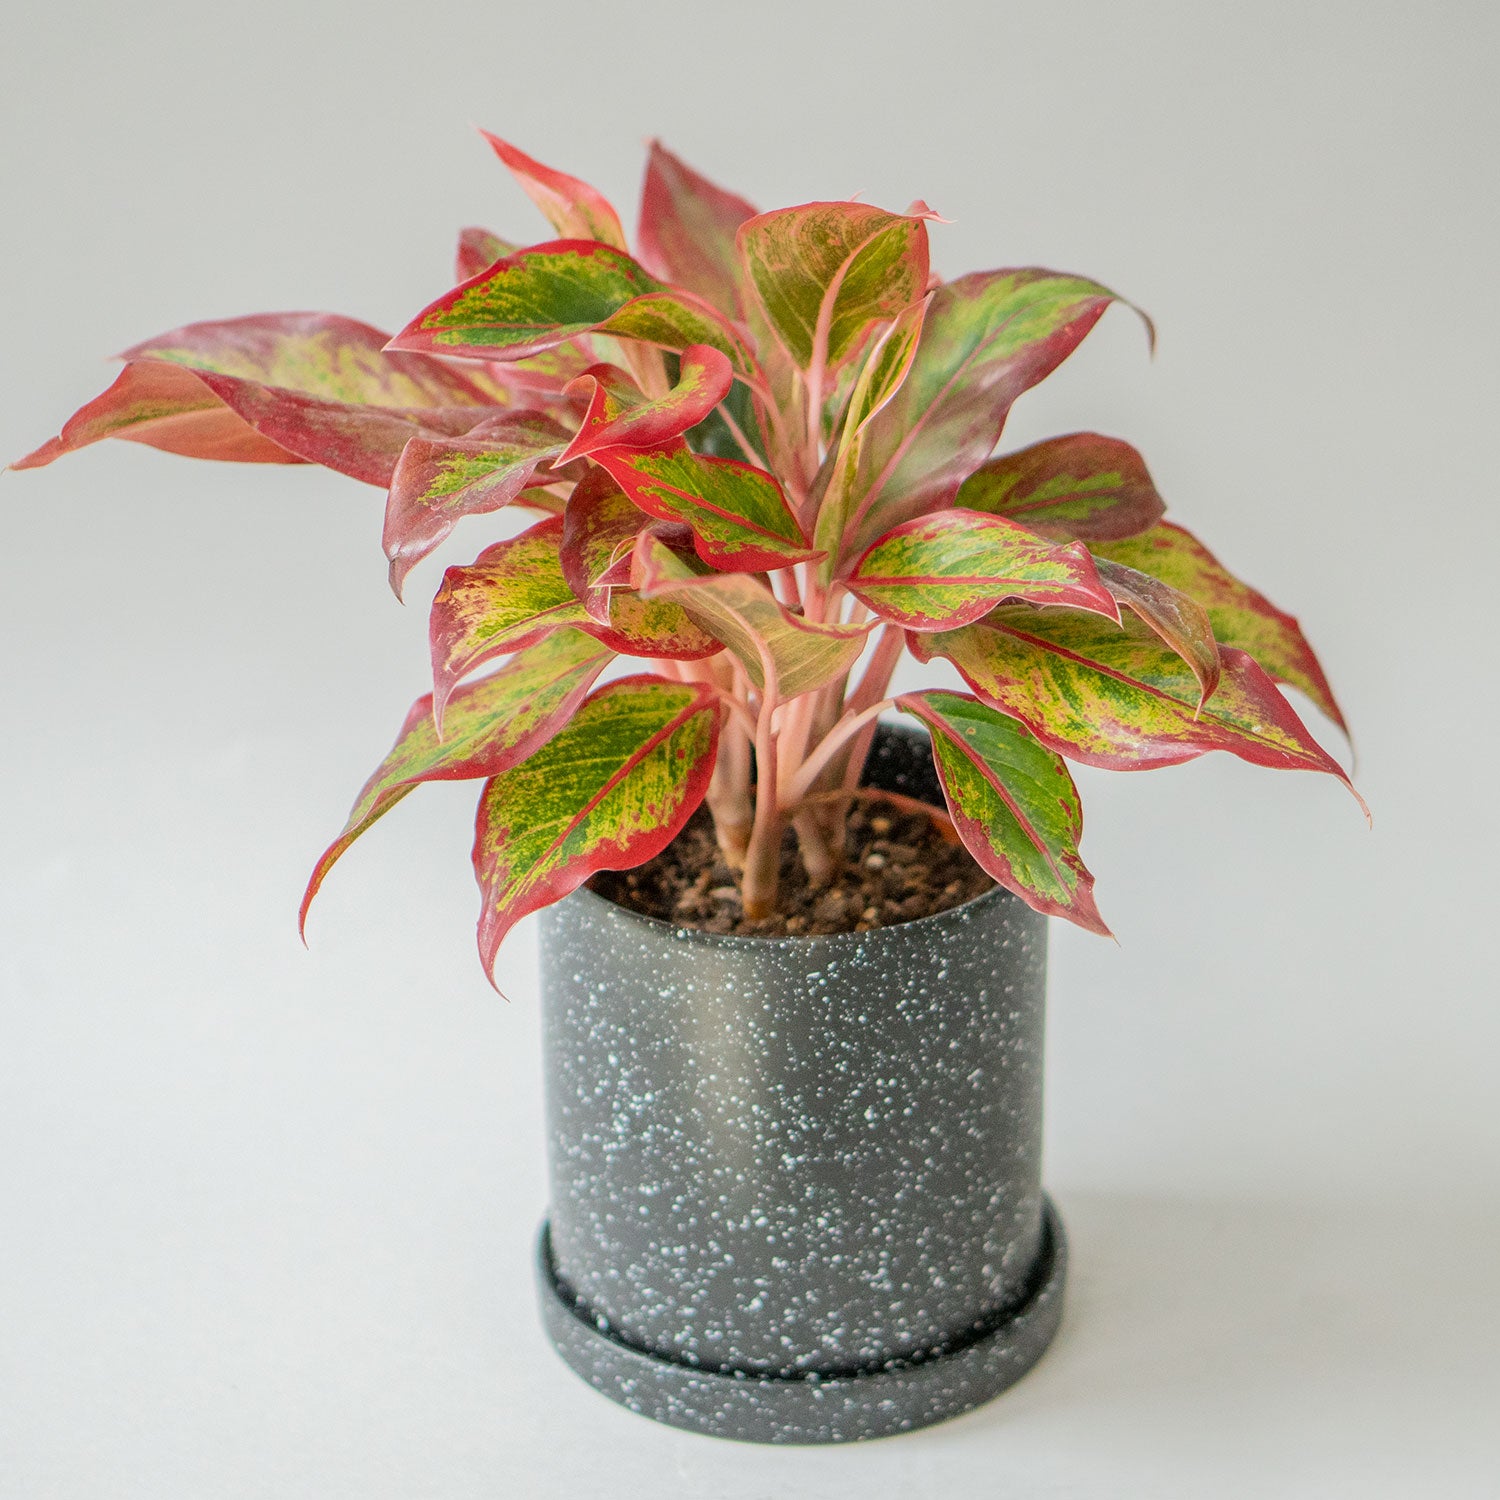 Potted Easy-Care Chinese Evergreen - Shop Houseplant Aglaonema Crete Red Valentine 6” - Buy repotted indoor plant Chinese Evergreen for delivery at Planteia